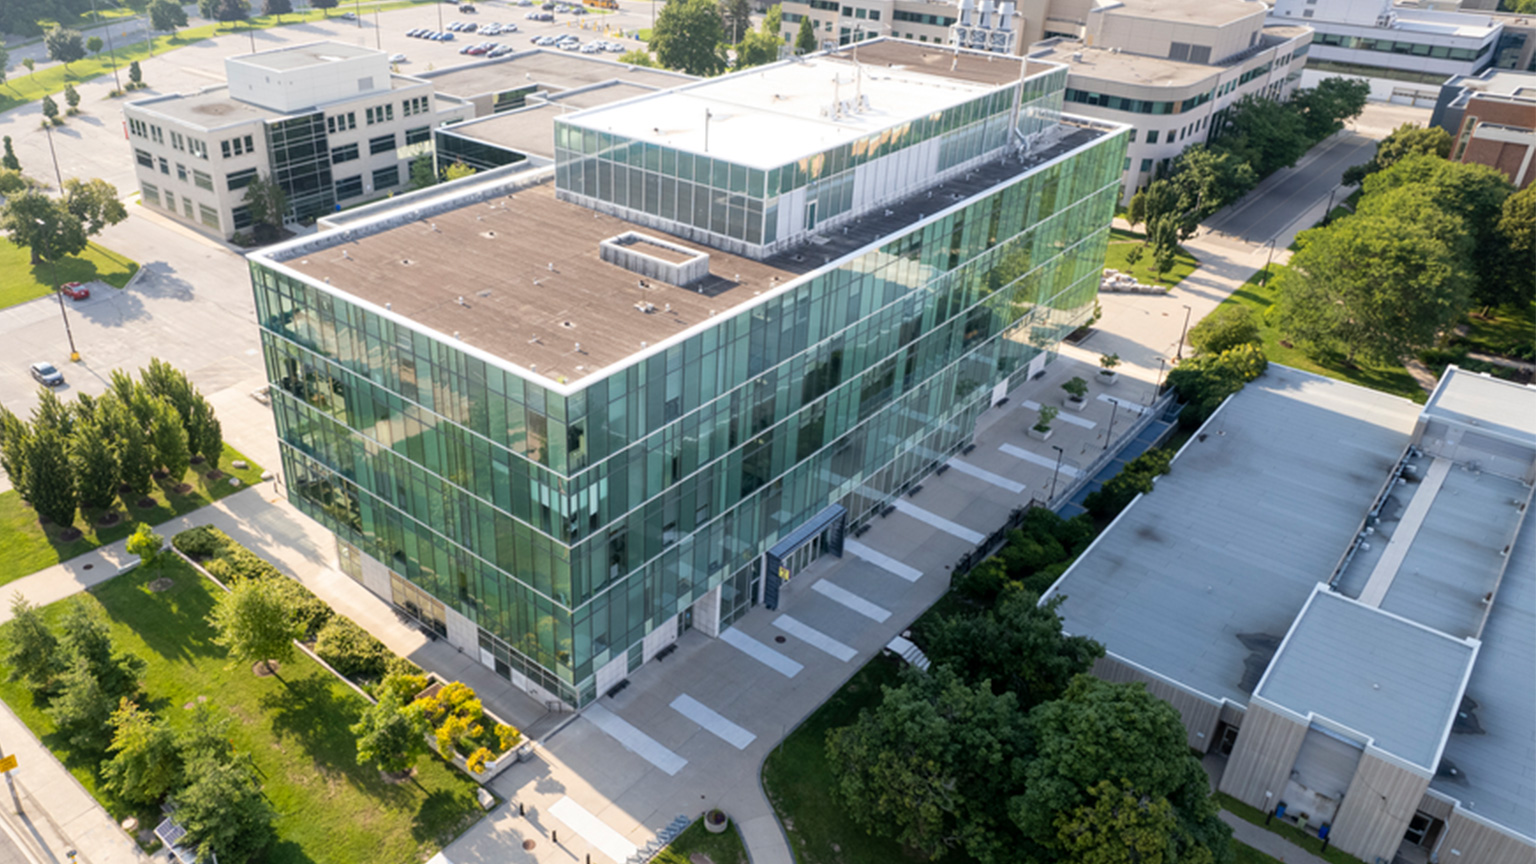 An aerial view of the Engineering Technology Building ETB